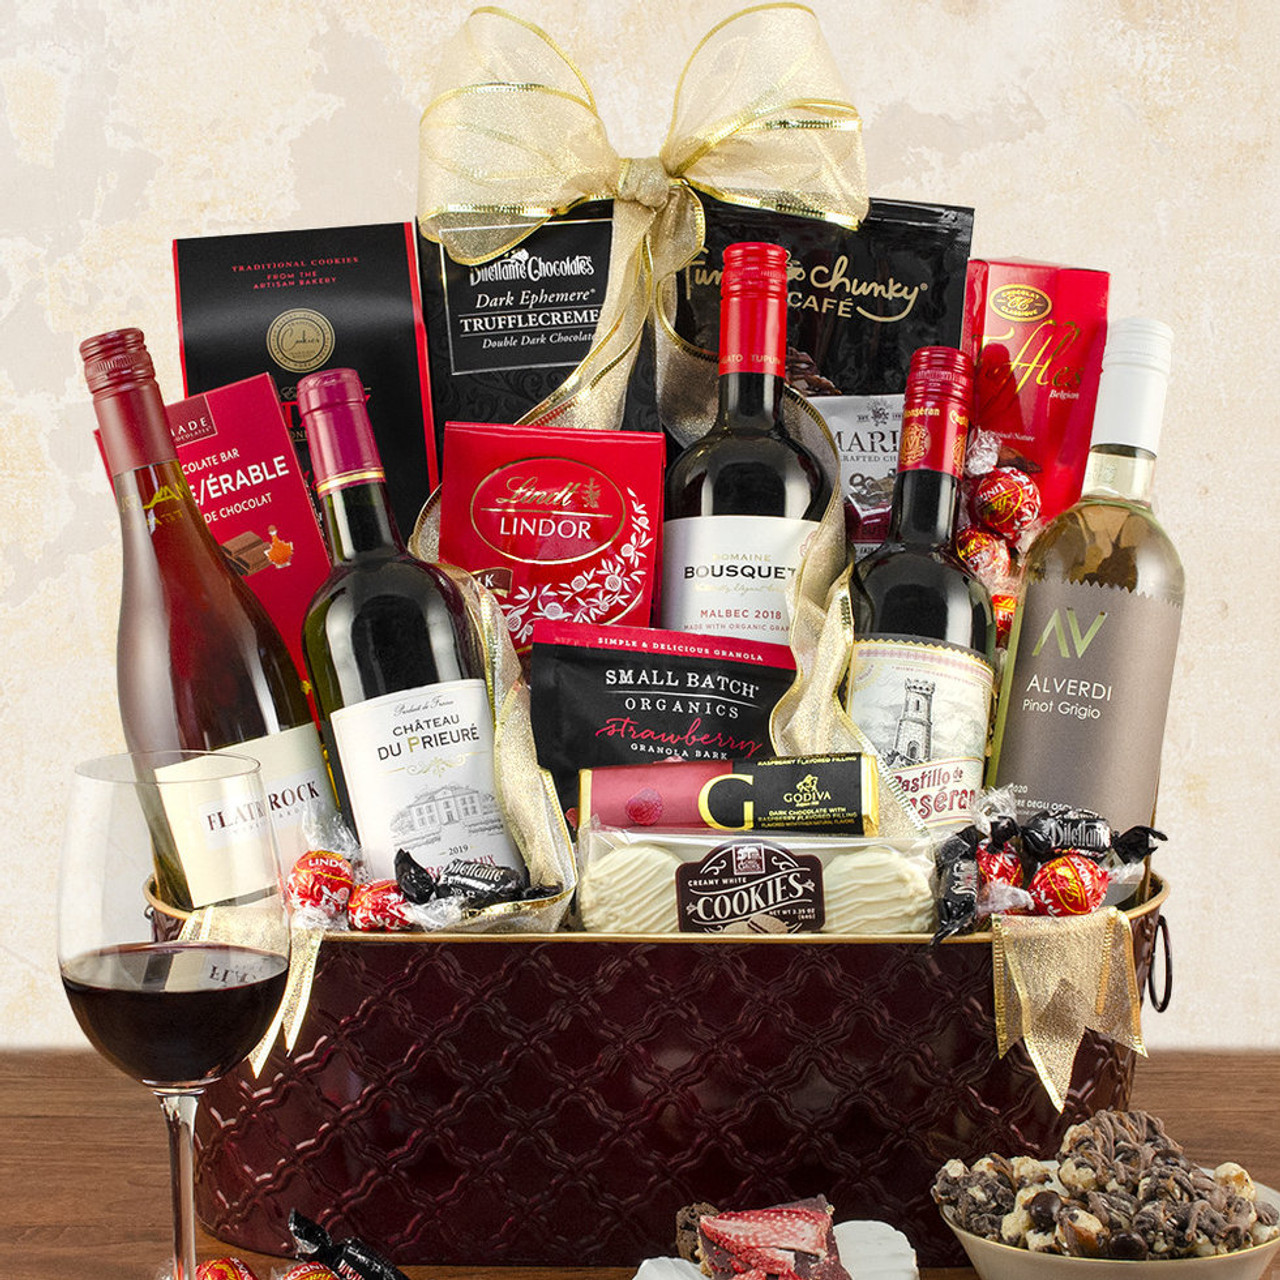 Bakery Gift Baskets & Gourmet Gifts